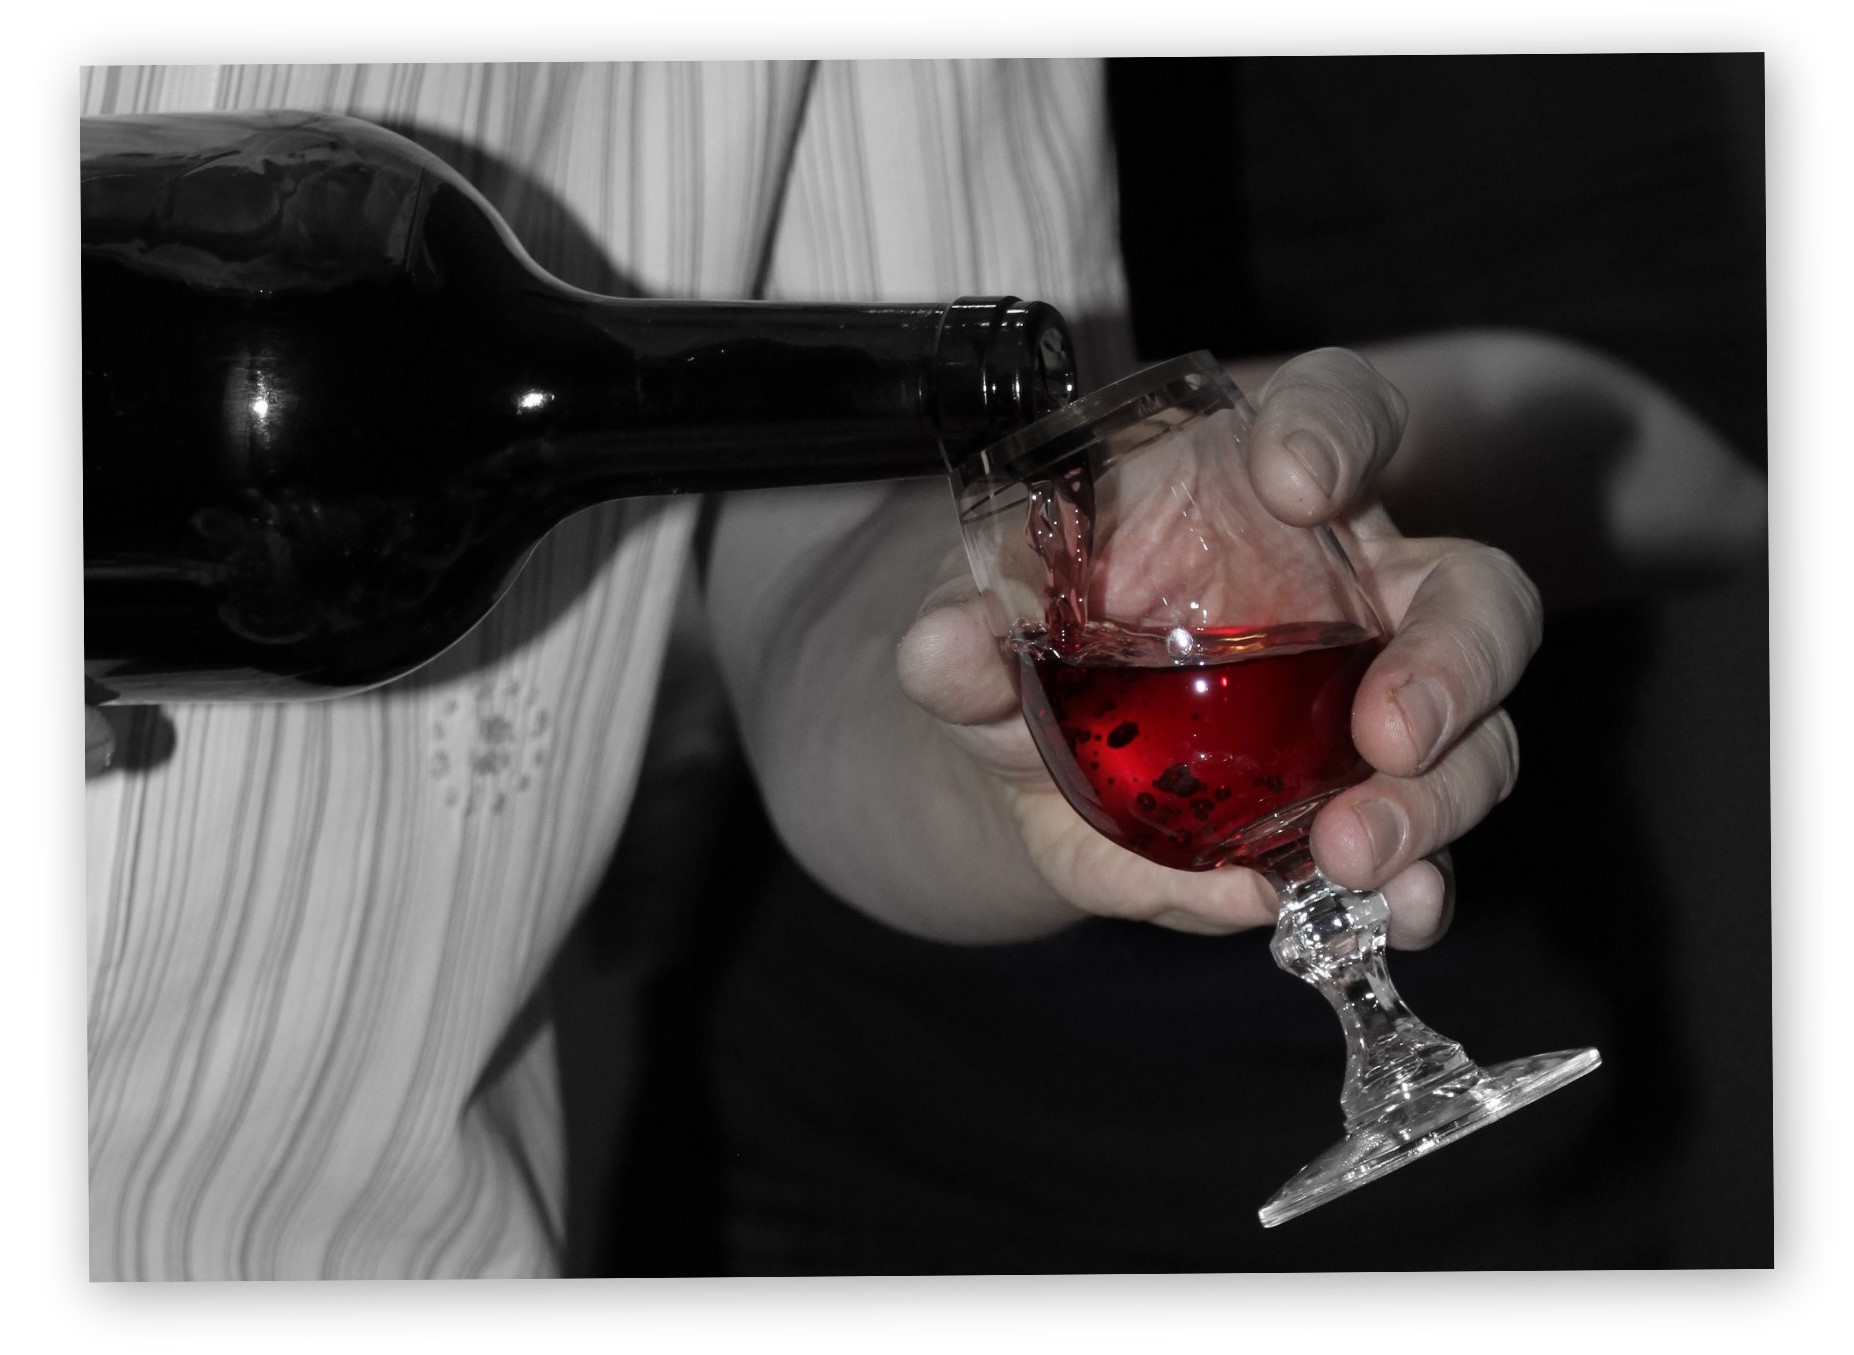 Glass of red wine on a black and white background with a bottle nearby.